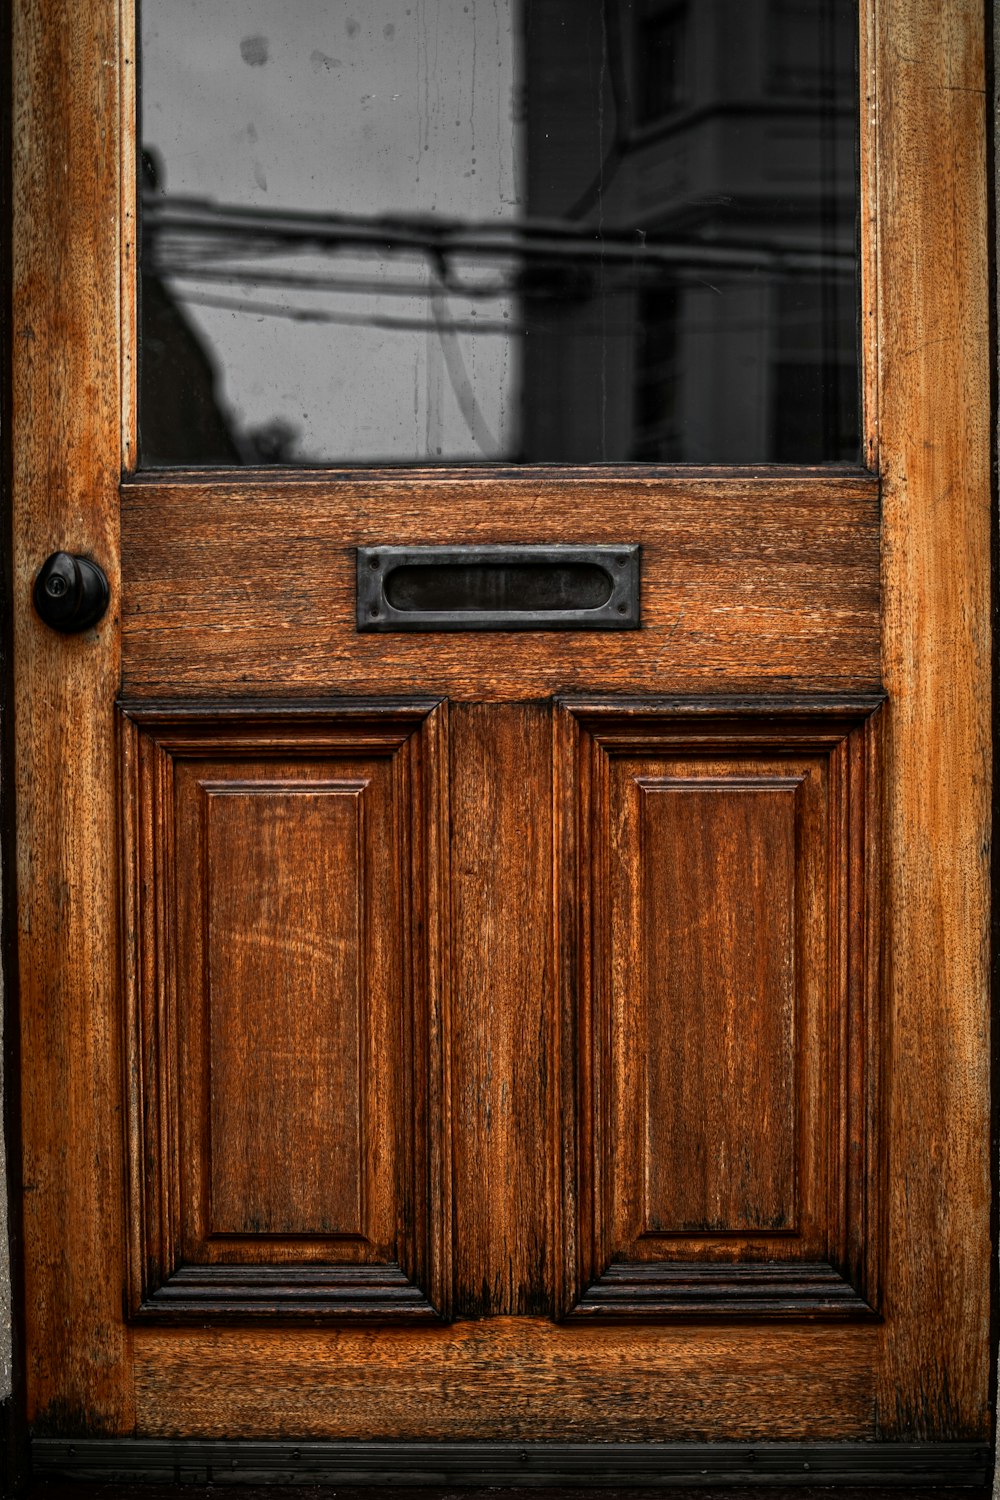 a close up of a wooden door with a glass